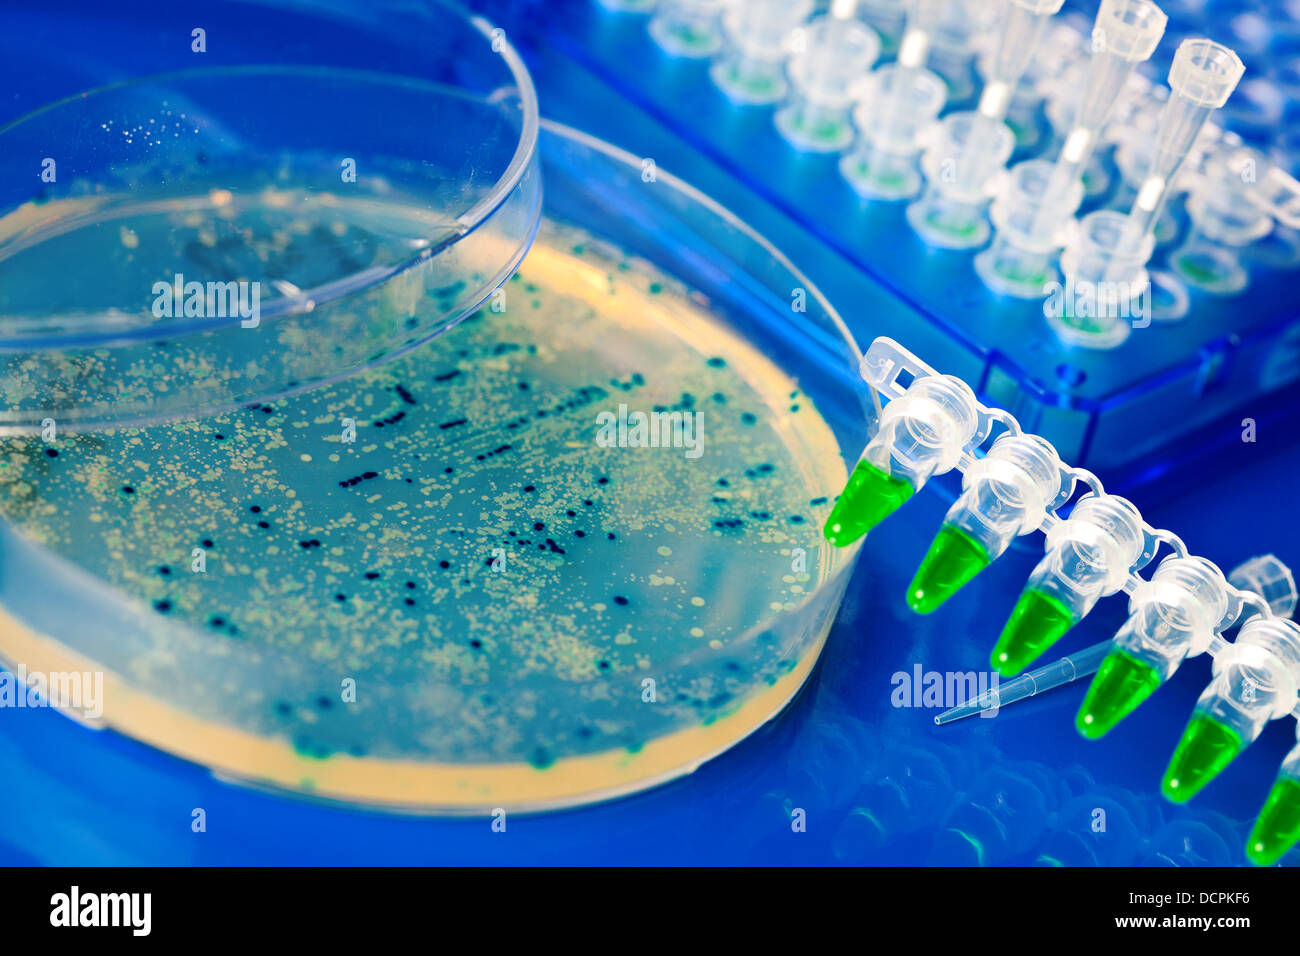 a Petri Dish with growing Virus and bacteria cells. microorganis Stock Photo